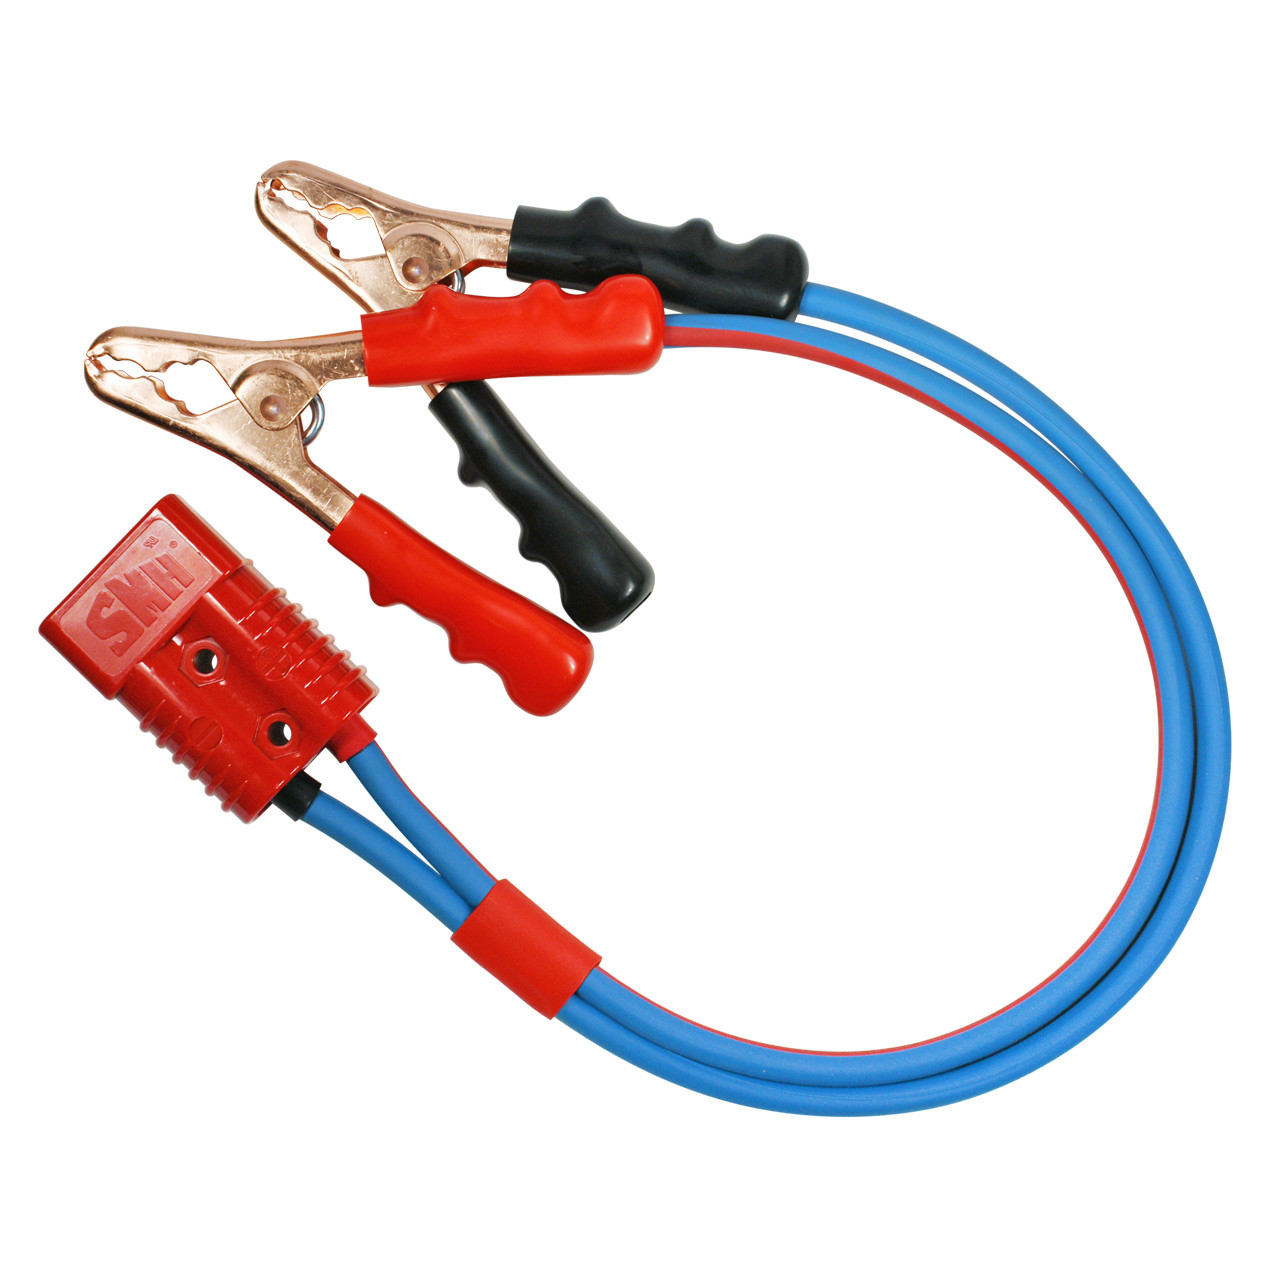 2 foot Jumper Cable Clamp Adapter 2 gauge dual-conductor Arctic Superflex blue wire with quick disconnect plug in to Booster Cable Clamps